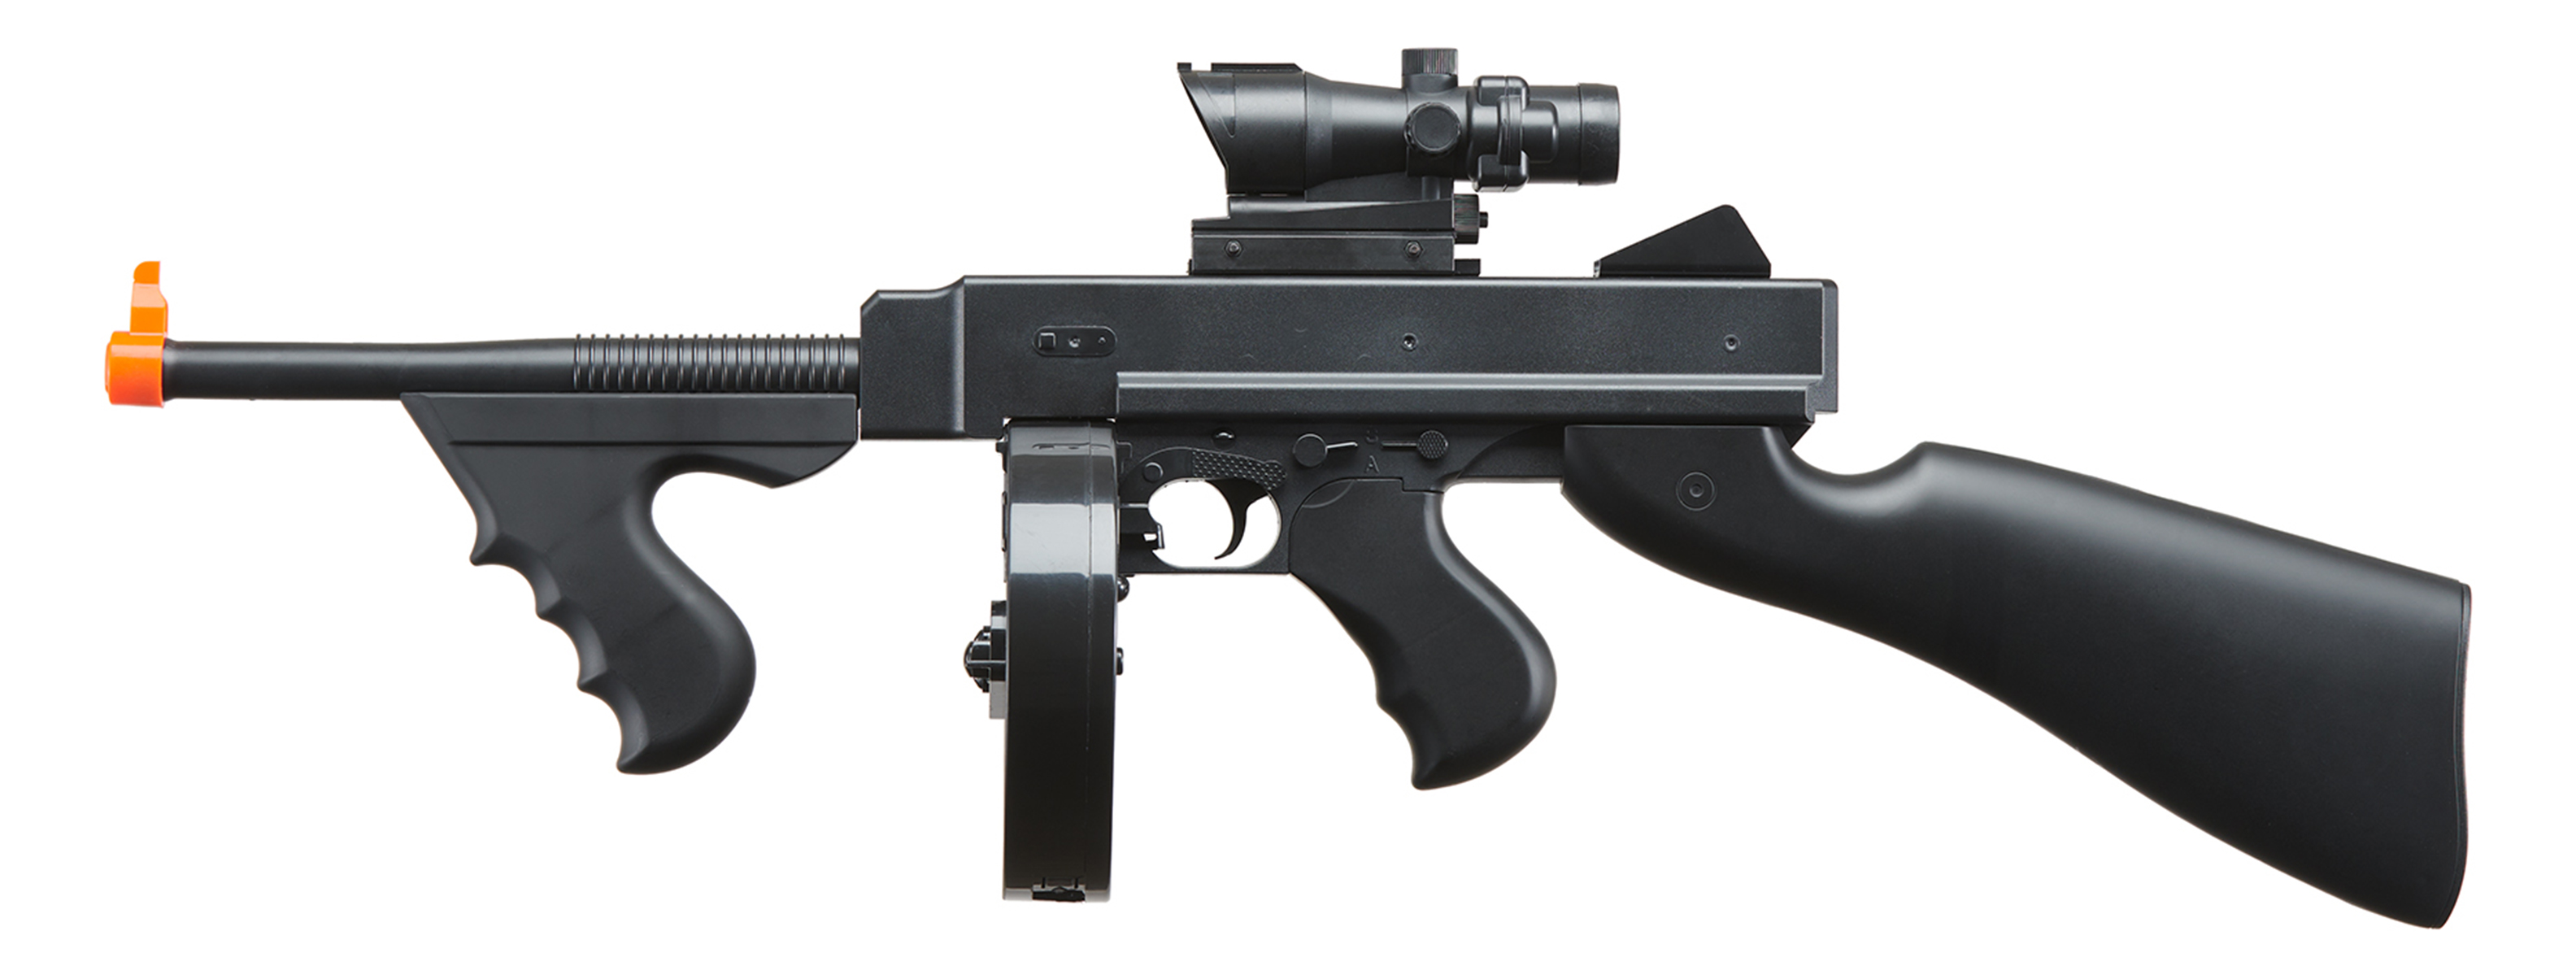 24 Inch - 3/4 Scale - New UK Arms M16 Full Stock - Spring Airsoft Gun Rifle  - P2336